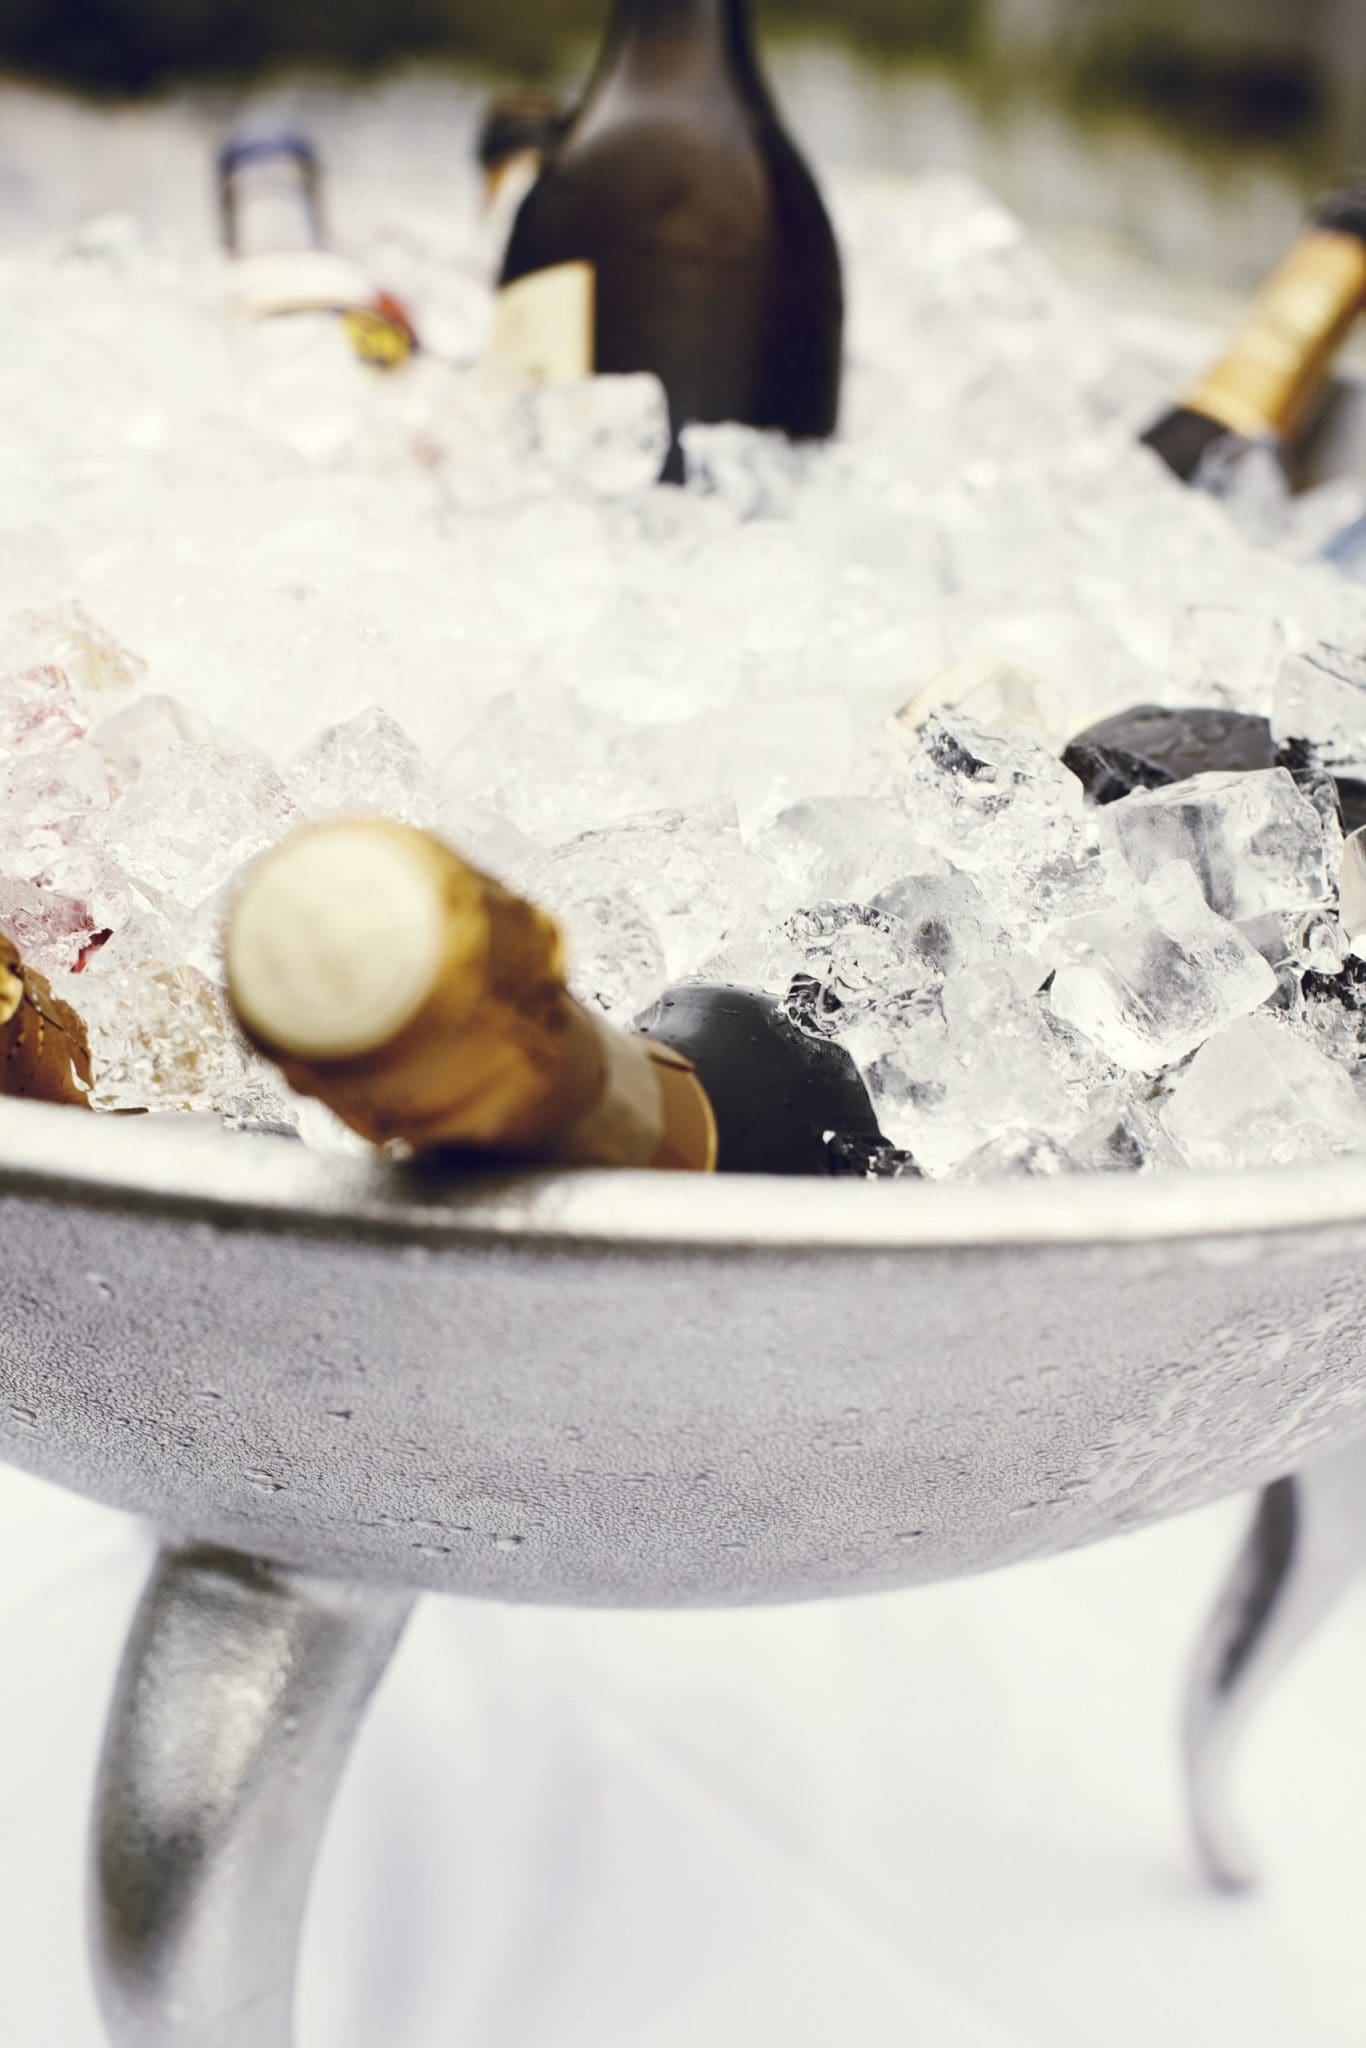 Image describes champagne on ice.